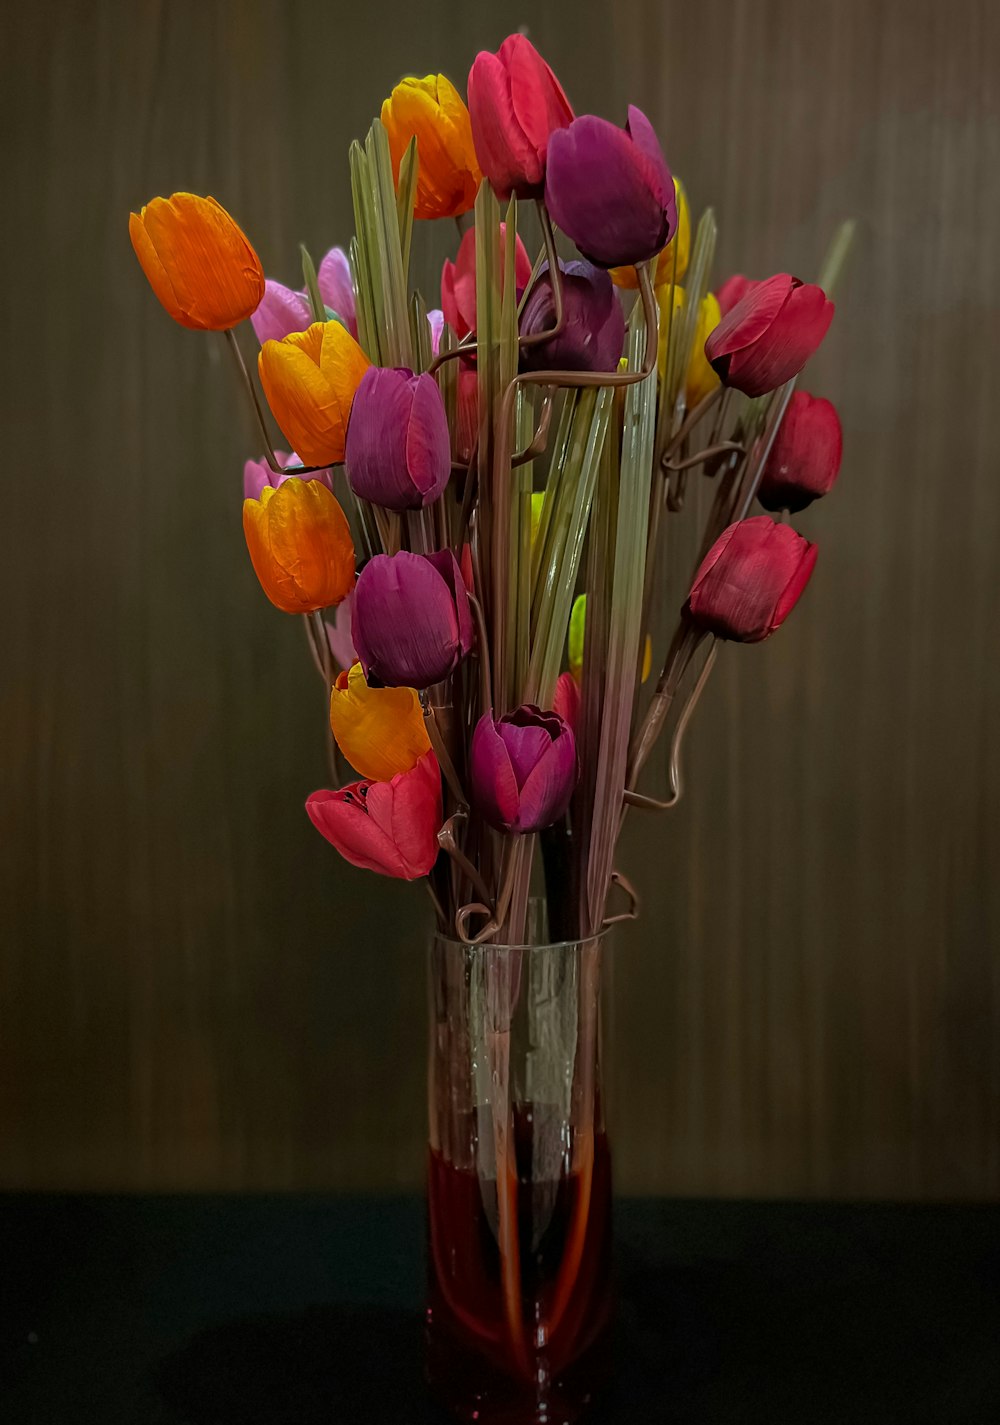 a vase filled with colorful flowers on top of a table